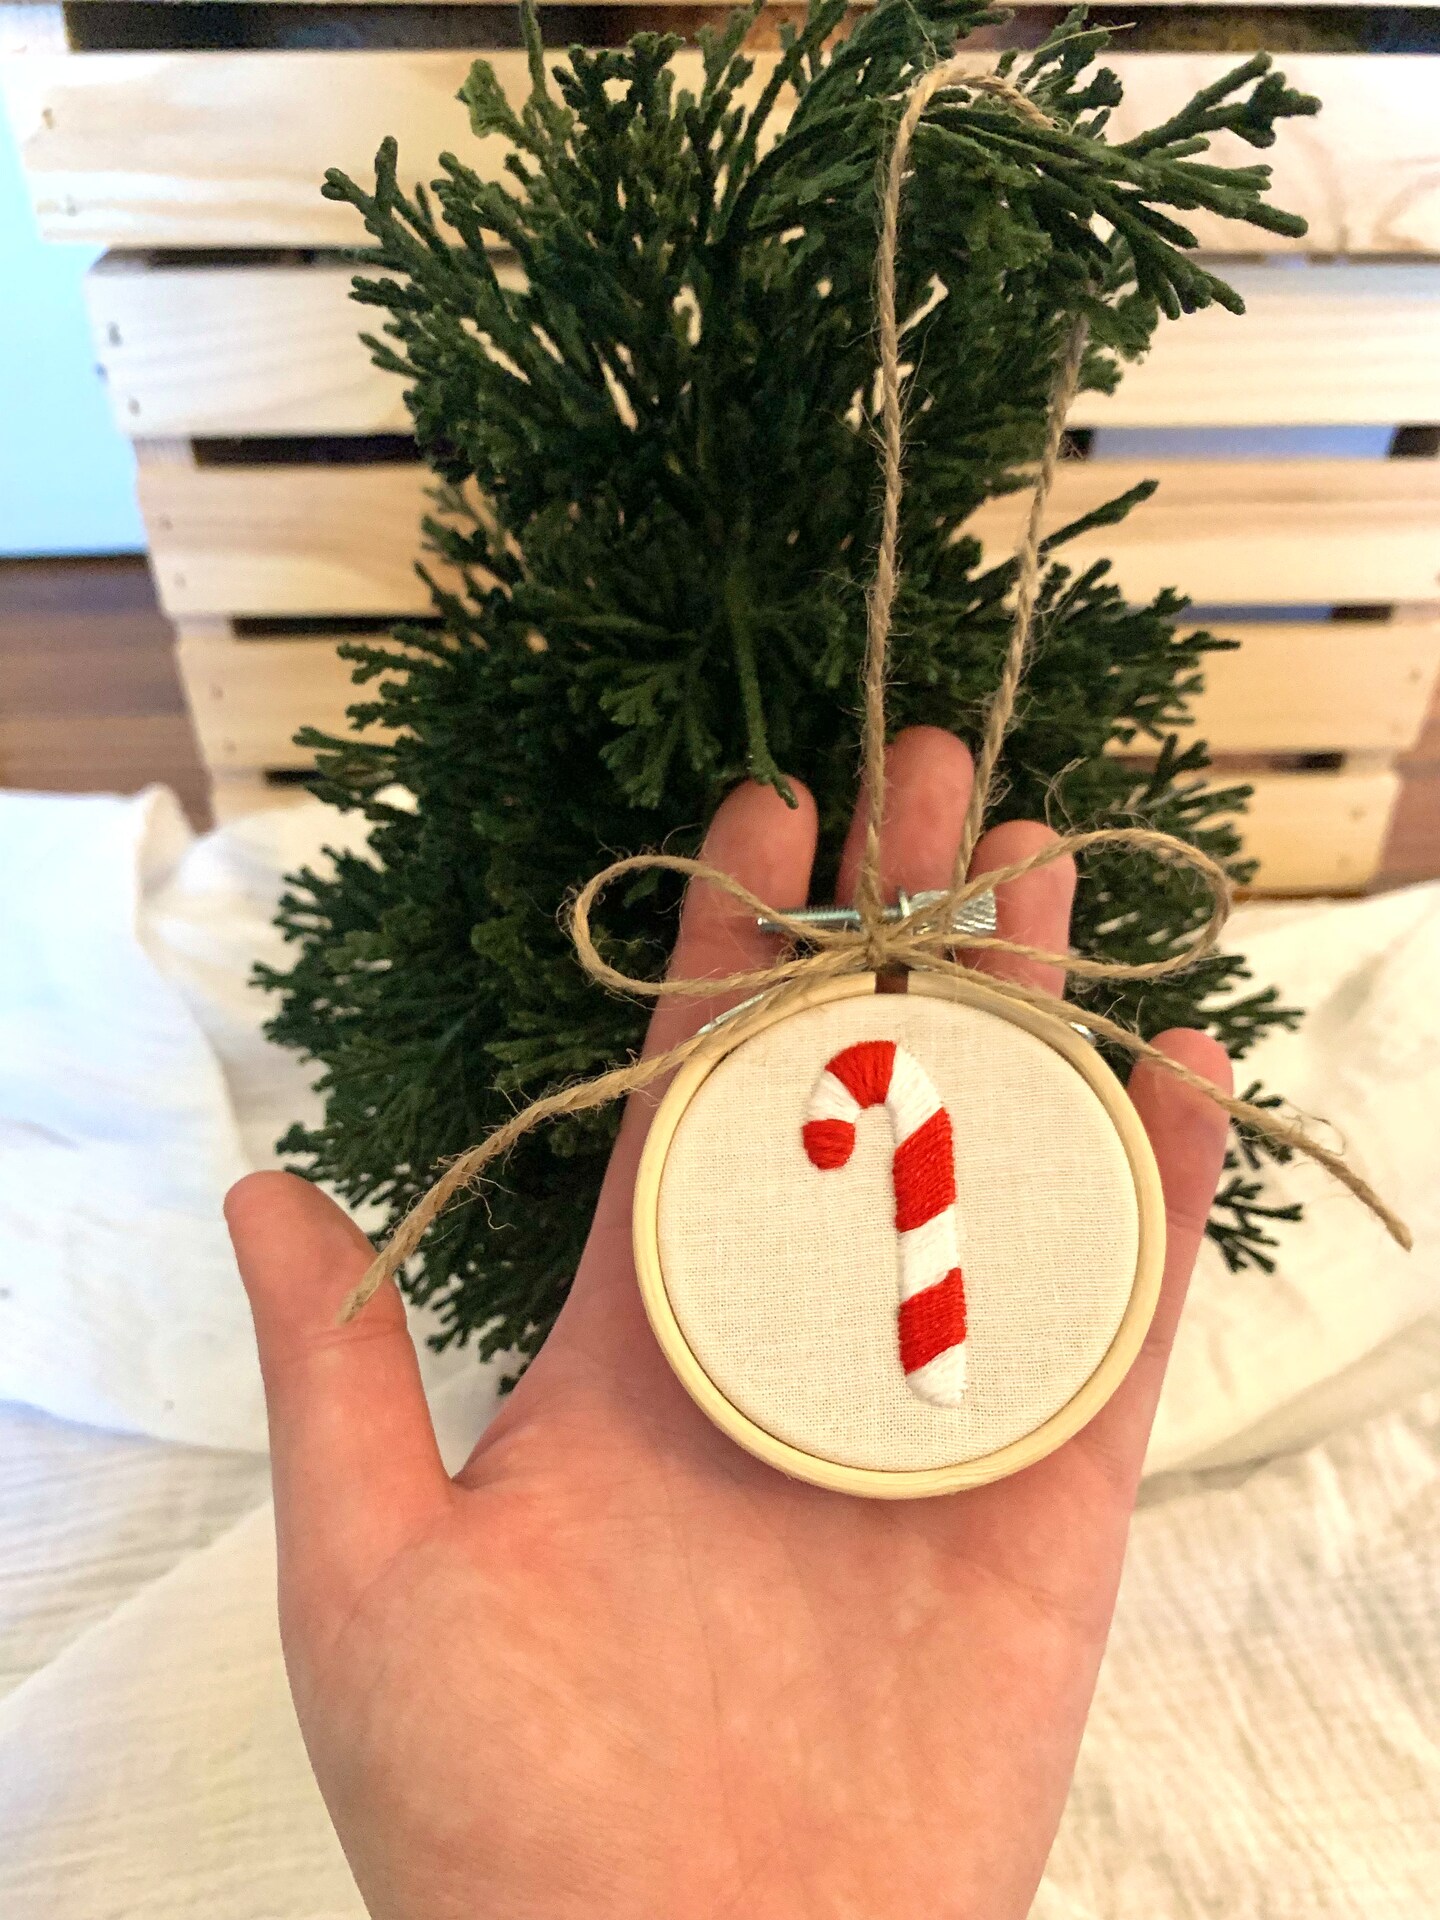 Hand-Embroidered Christmas Ornaments, Rustic Twine Mini Hoop Holiday Decor